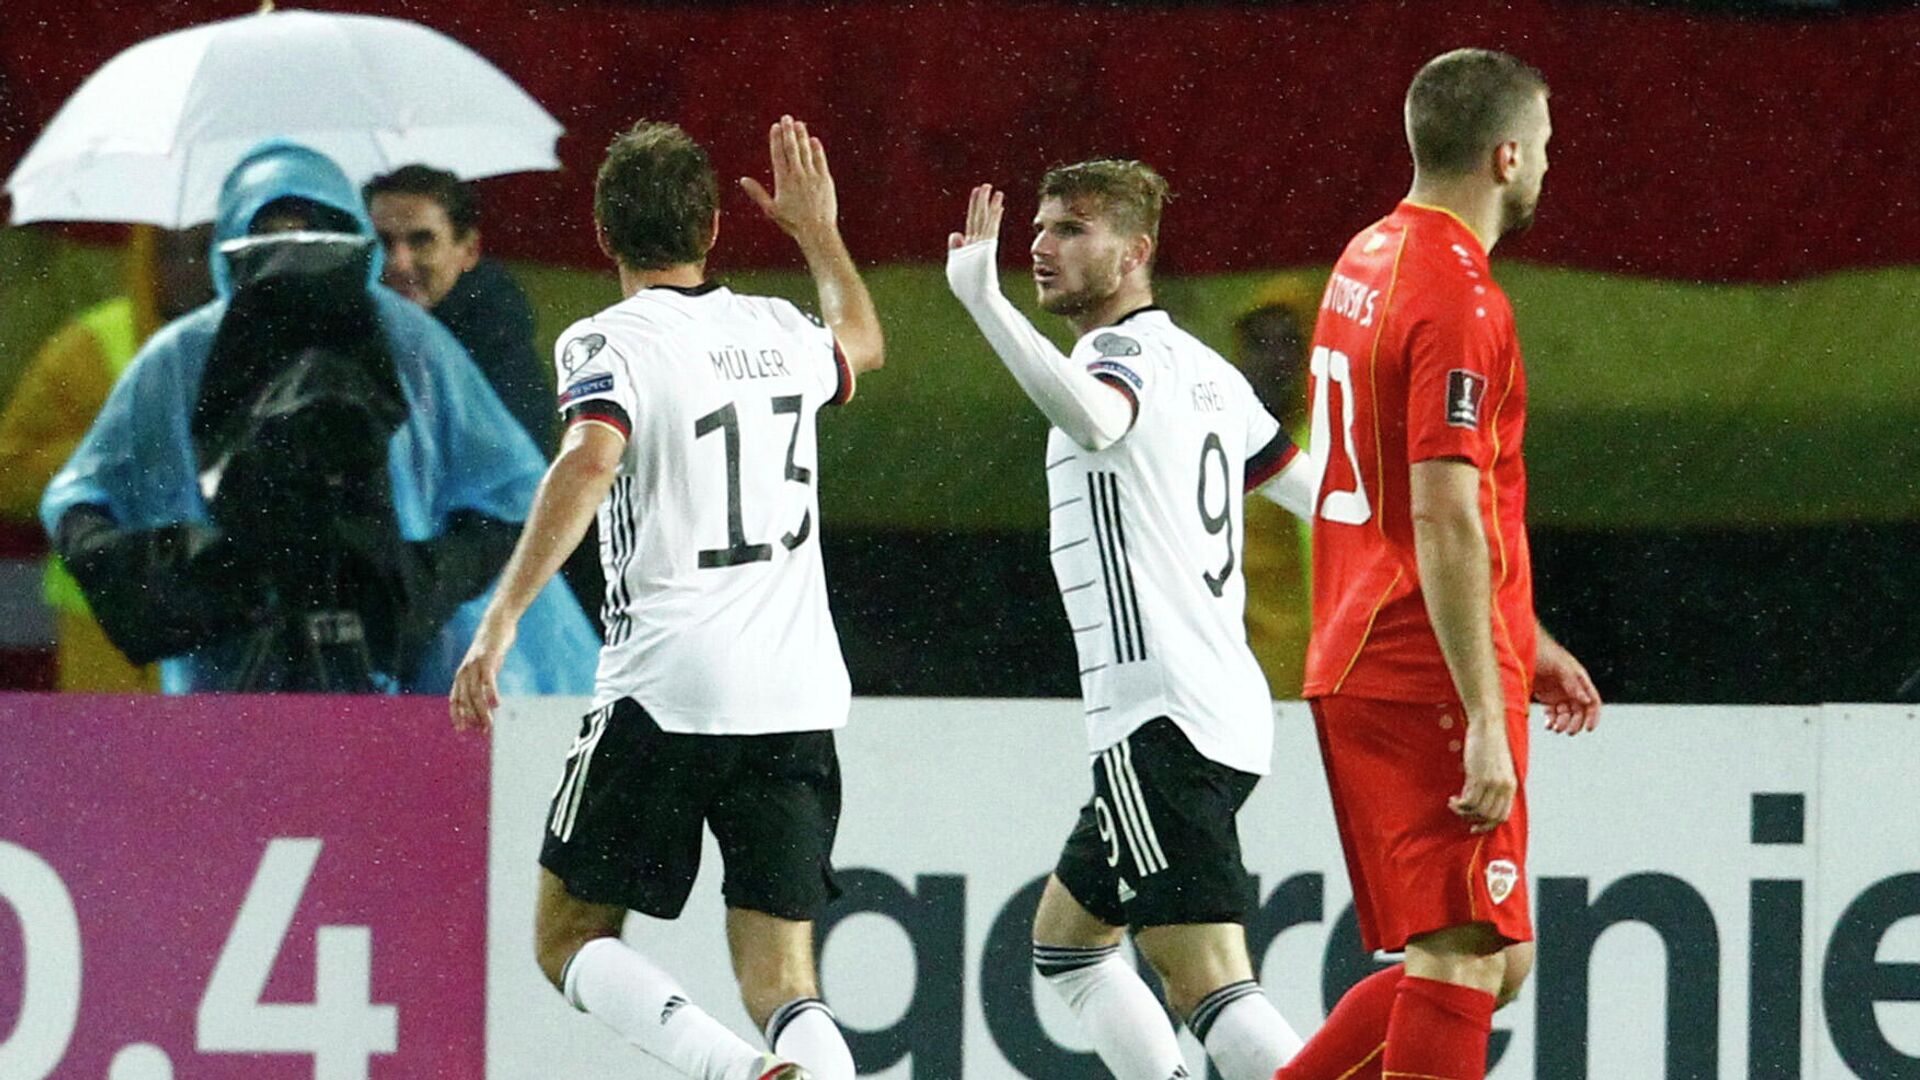 Soccer Football - World Cup - UEFA Qualifiers - Group J - North Macedonia v Germany - Toshe Proeski Arena, Skopje, North Macedonia - October 11, 2021 Germany's Timo Werner and Thomas Muller celebrate their first goal scored by Kai Havertz REUTERS/Ognen Teofilovski - РИА Новости, 1920, 11.10.2021